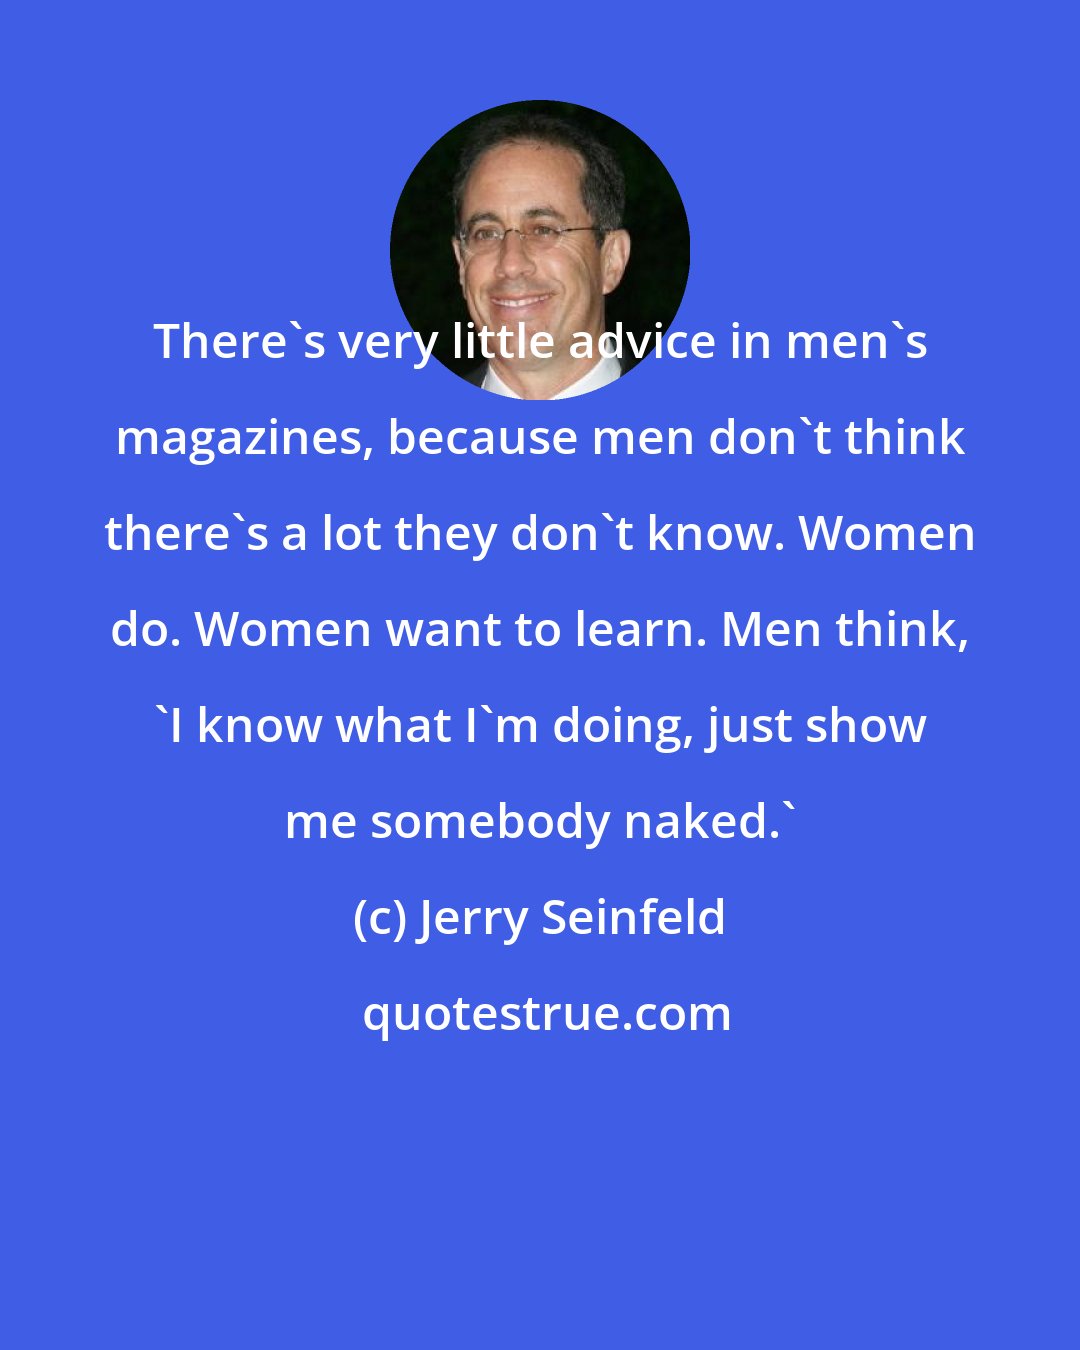 Jerry Seinfeld: There's very little advice in men's magazines, because men don't think there's a lot they don't know. Women do. Women want to learn. Men think, 'I know what I'm doing, just show me somebody naked.'